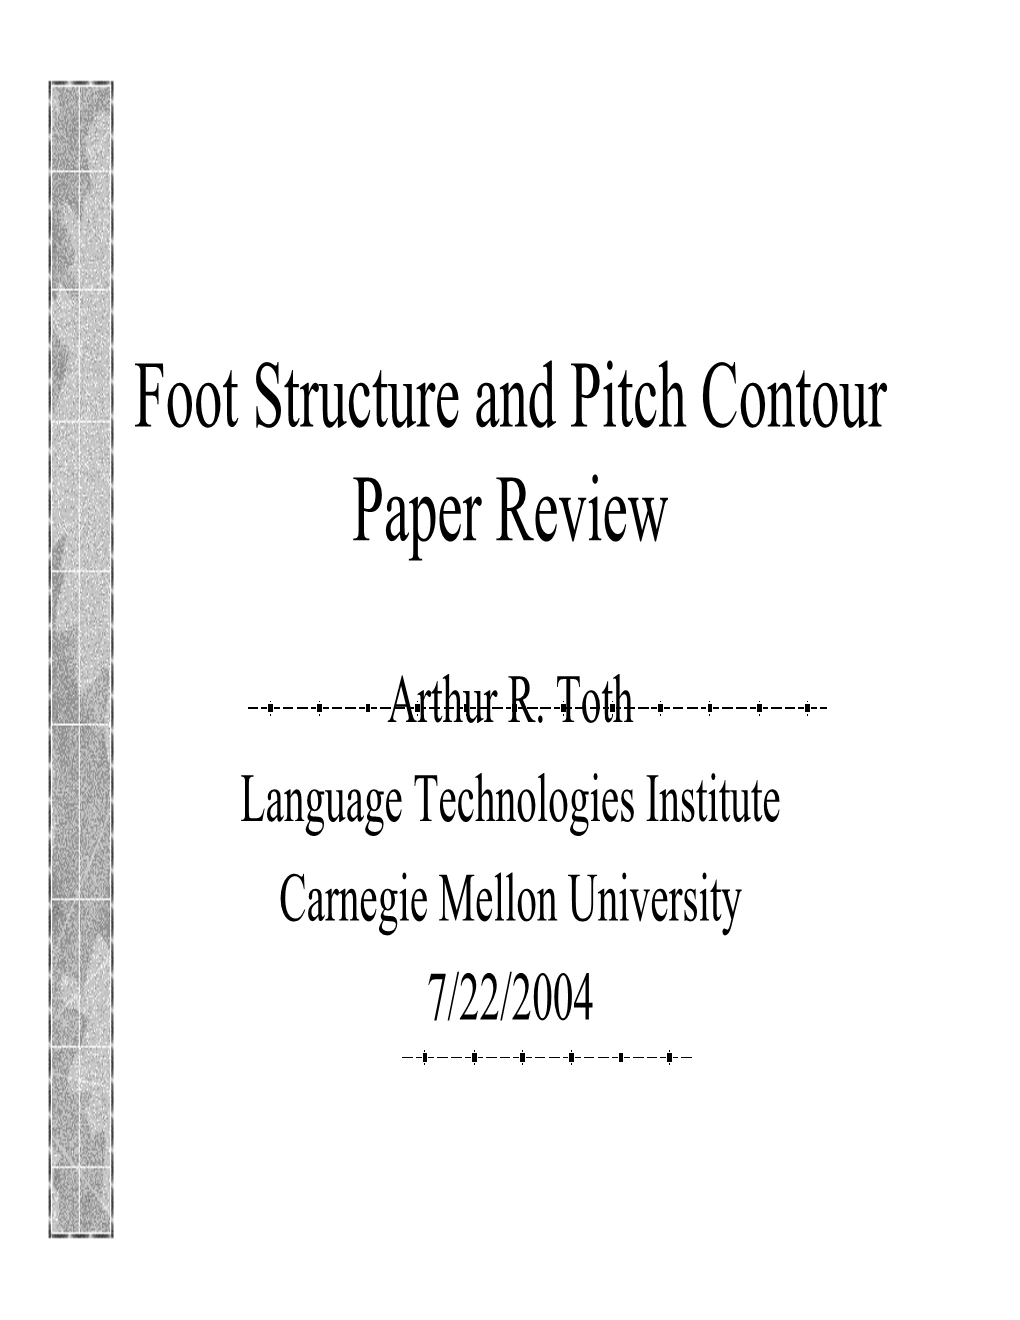 Foot Structure and Pitch Contour Paper Review